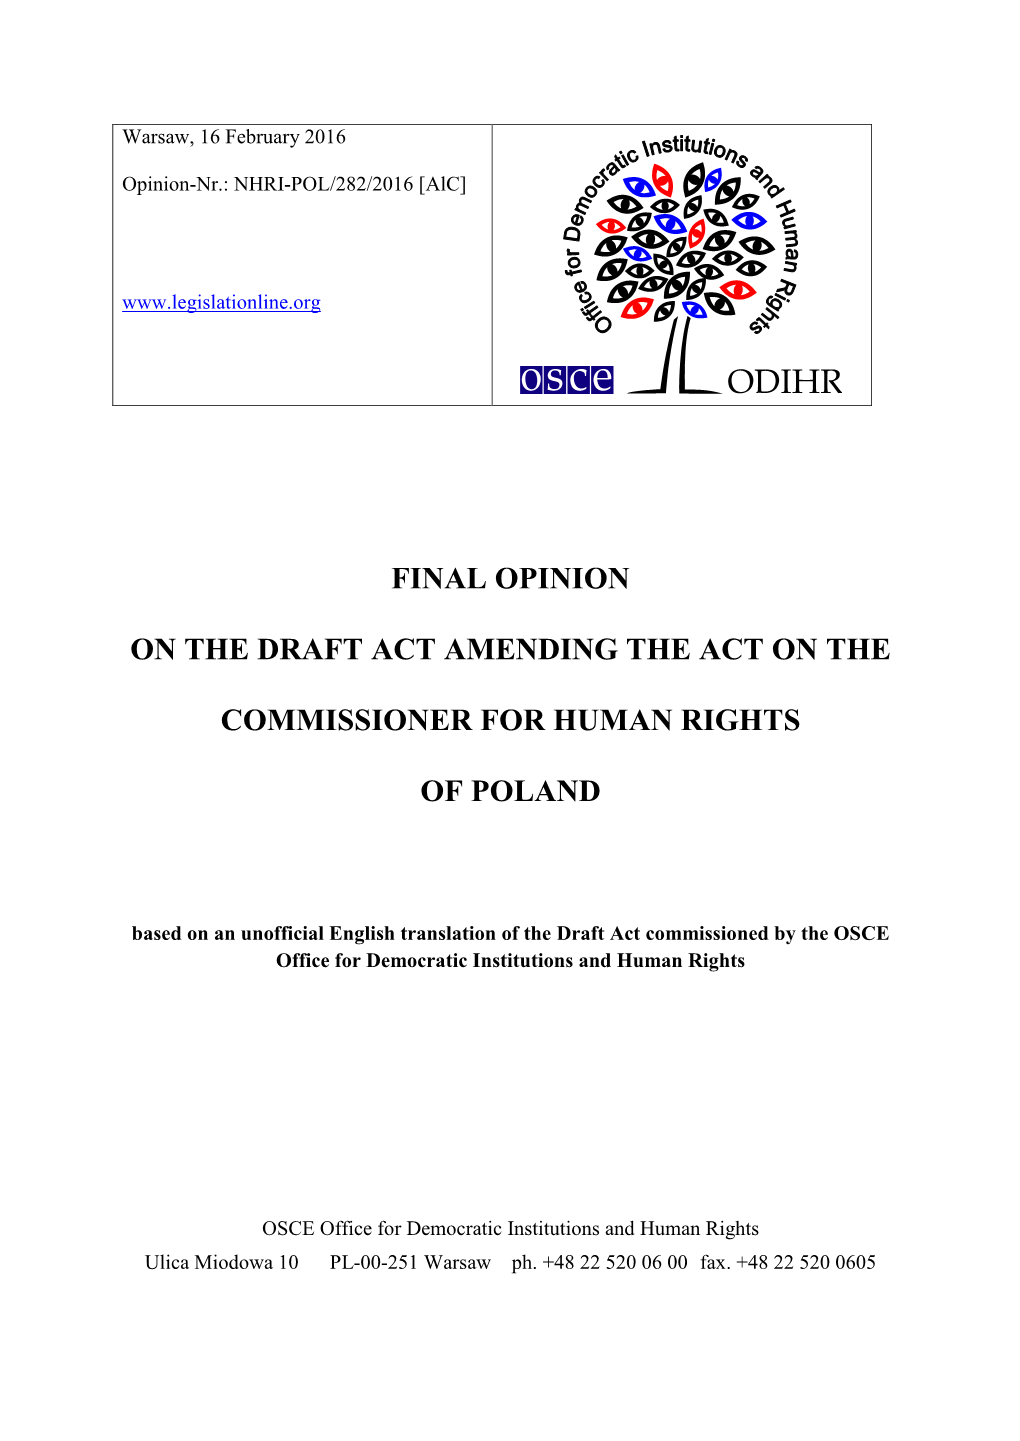 Final Opinion on the Draft Act Amending the Act on the Commissioner for Human Rights of Poland